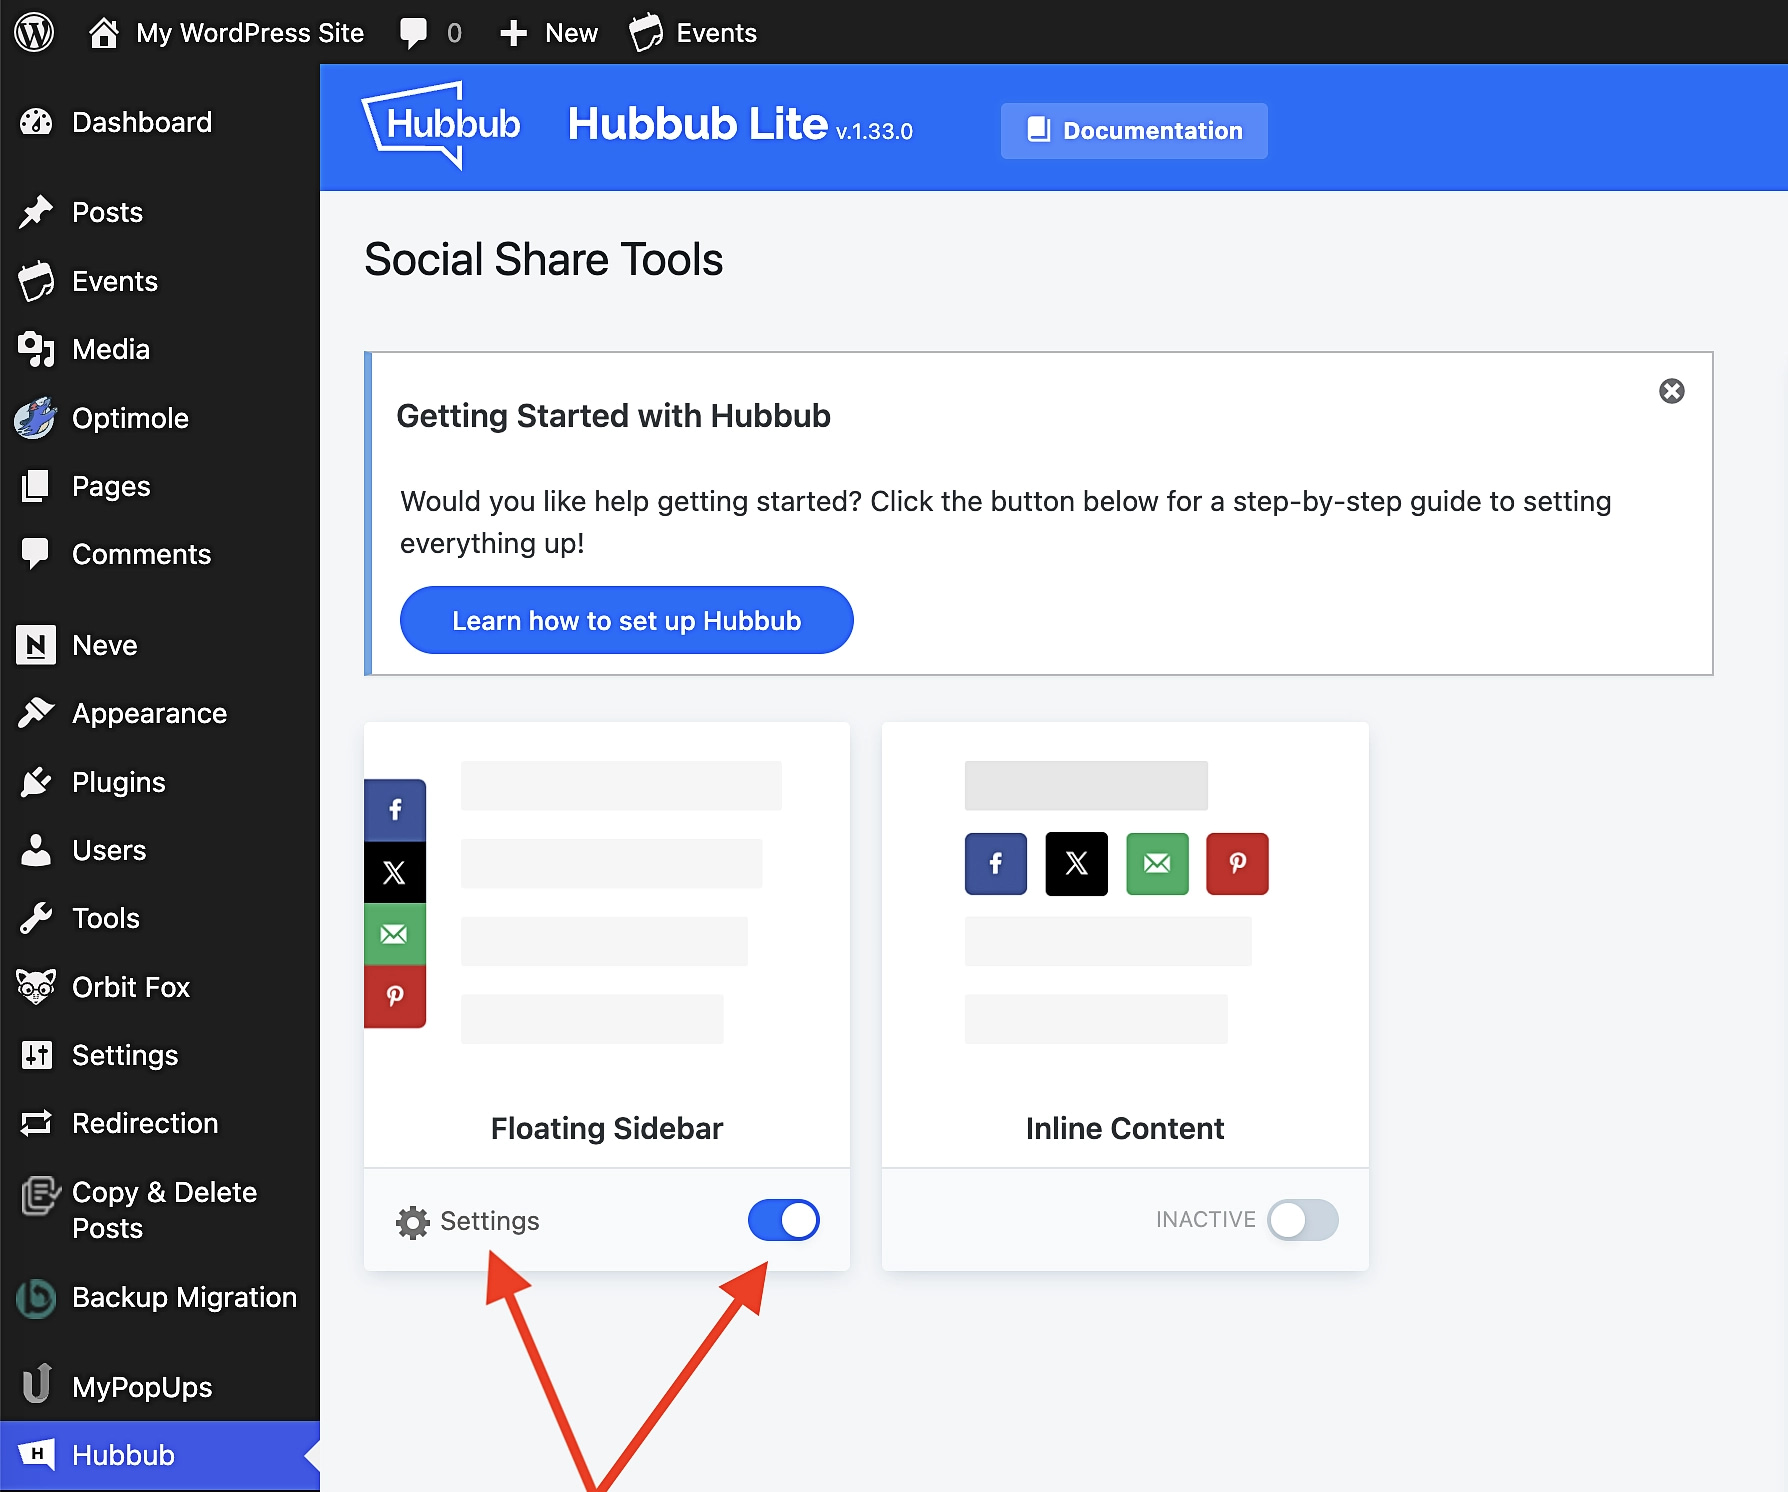 Hubbub choosing between floating sidebar or inline content for social icon display